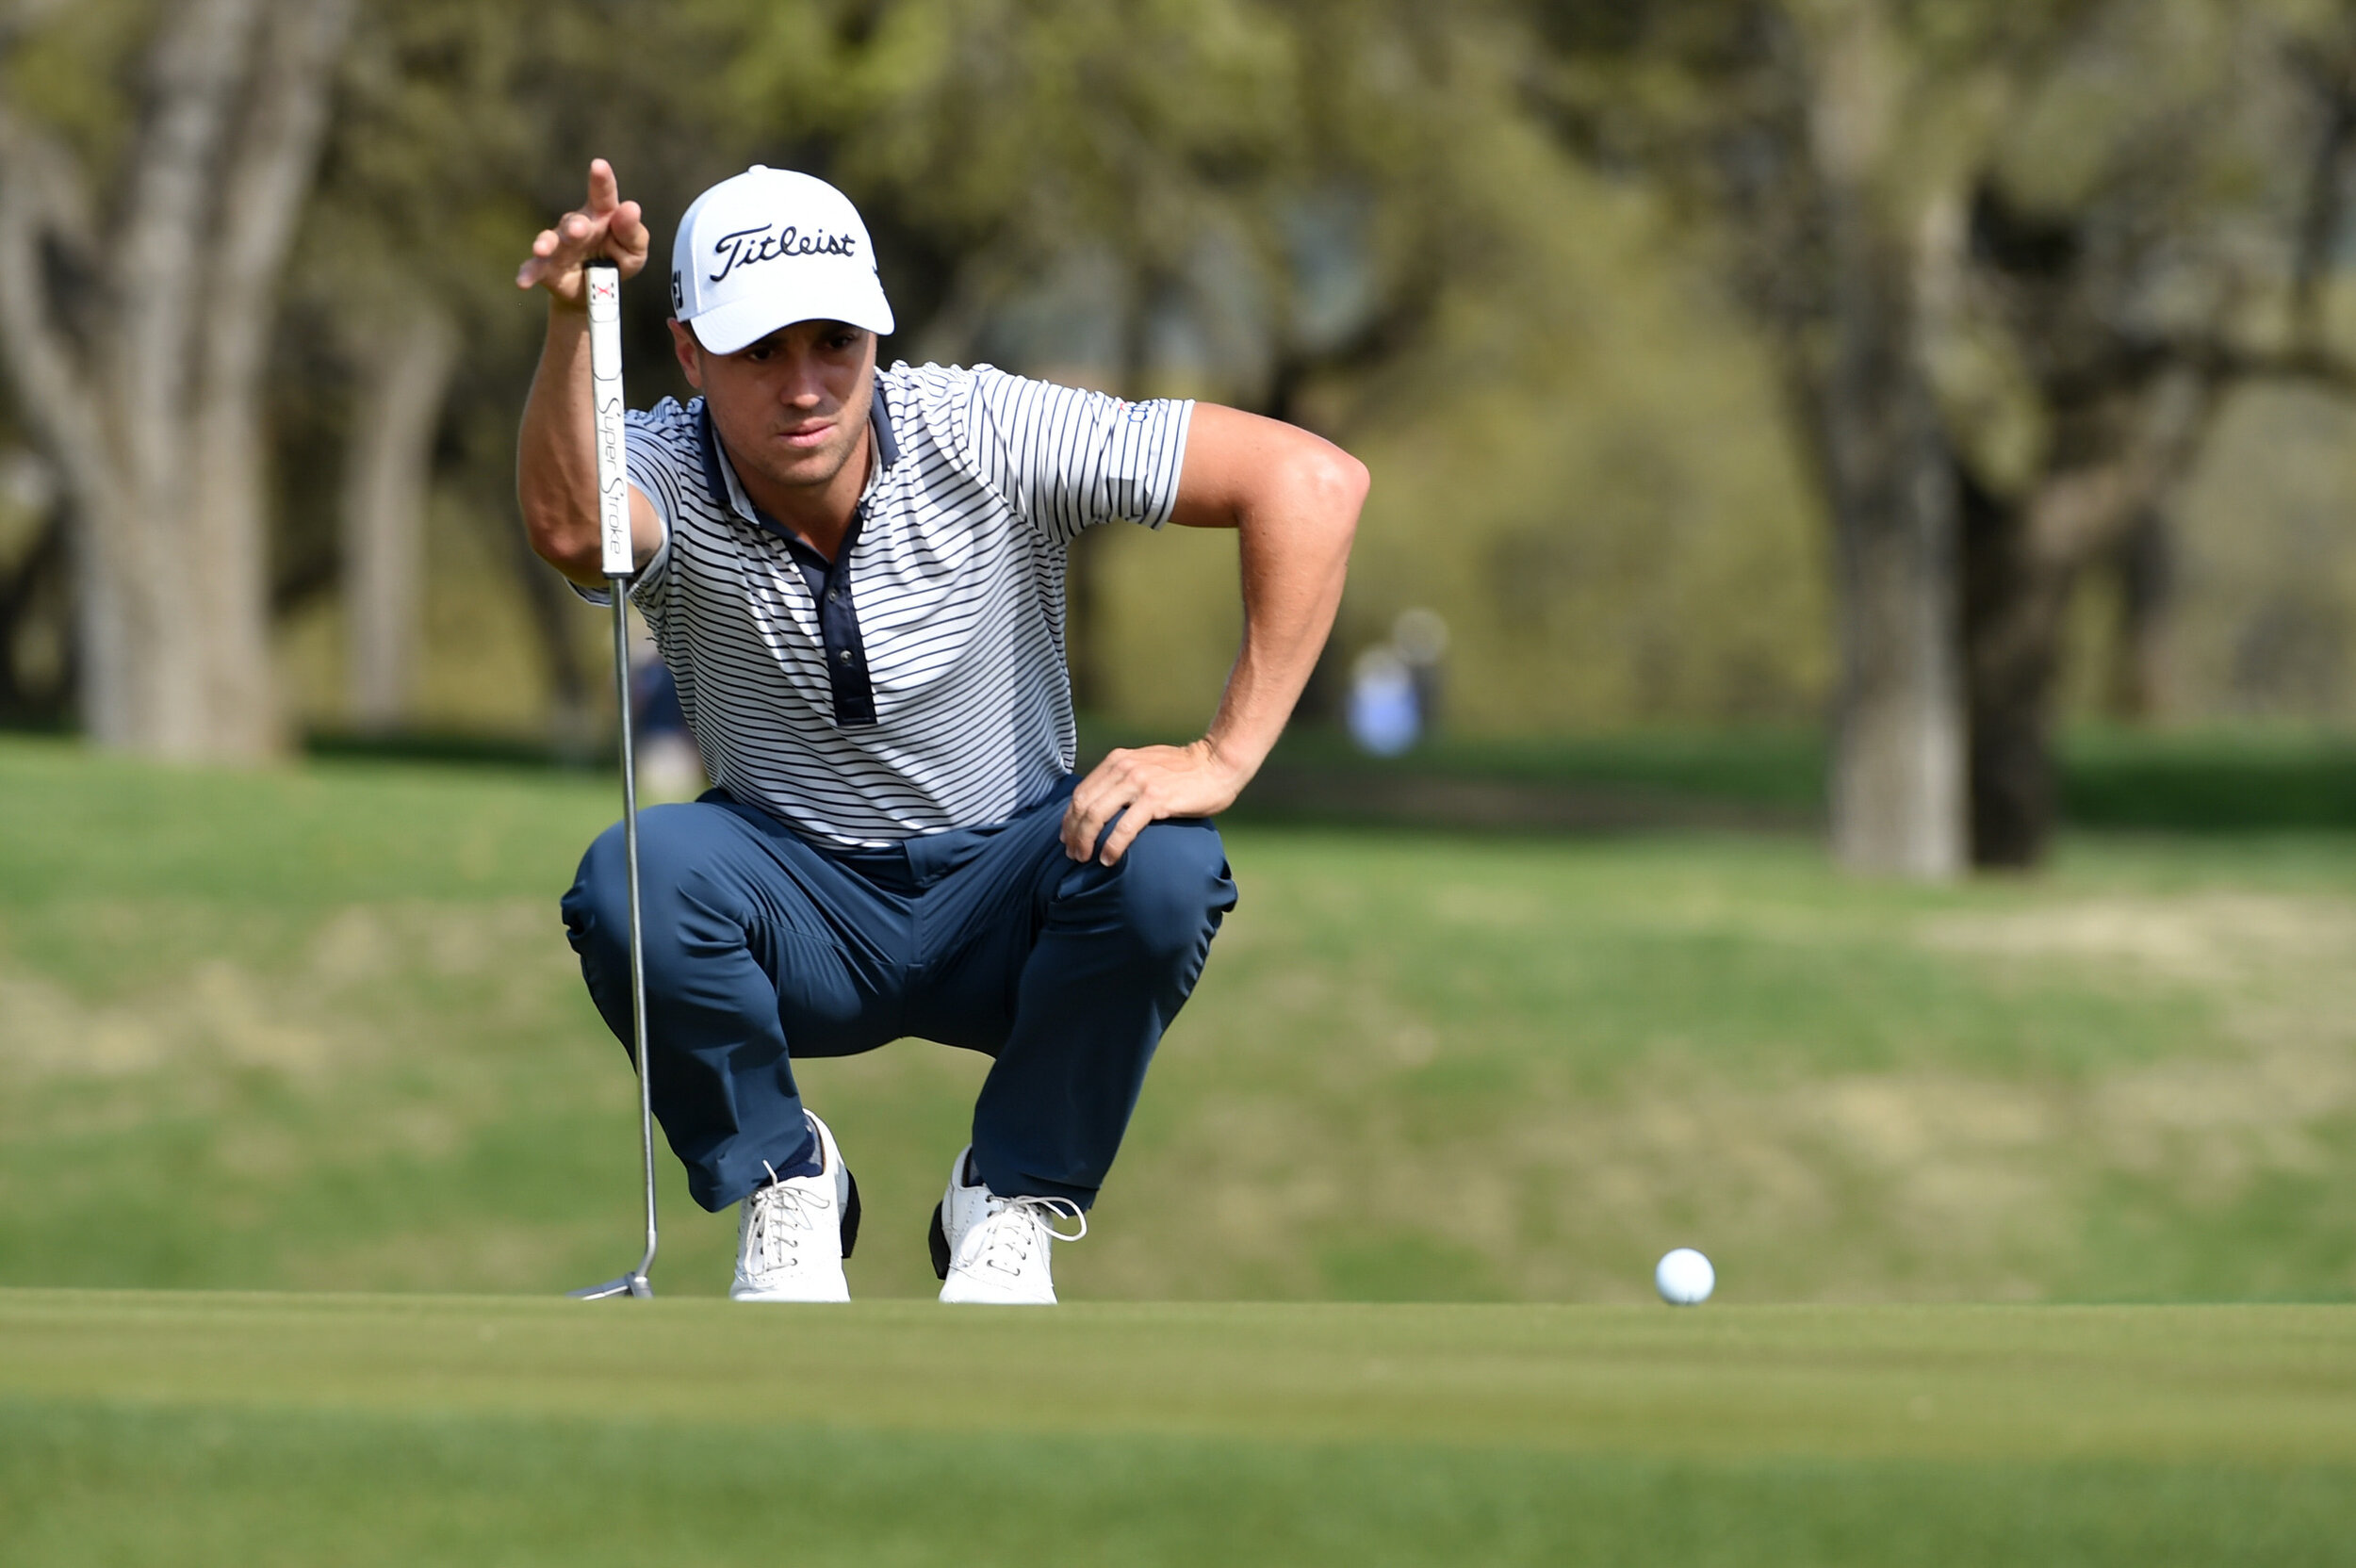  AUSTIN, TEXAS - MARCH 24: Justin Thomas of the United States lines up his putt on the first green in his match against Matt Kuchar of the United States during the first round of the World Golf Championships-Dell Technologies Match Play at Austin Cou